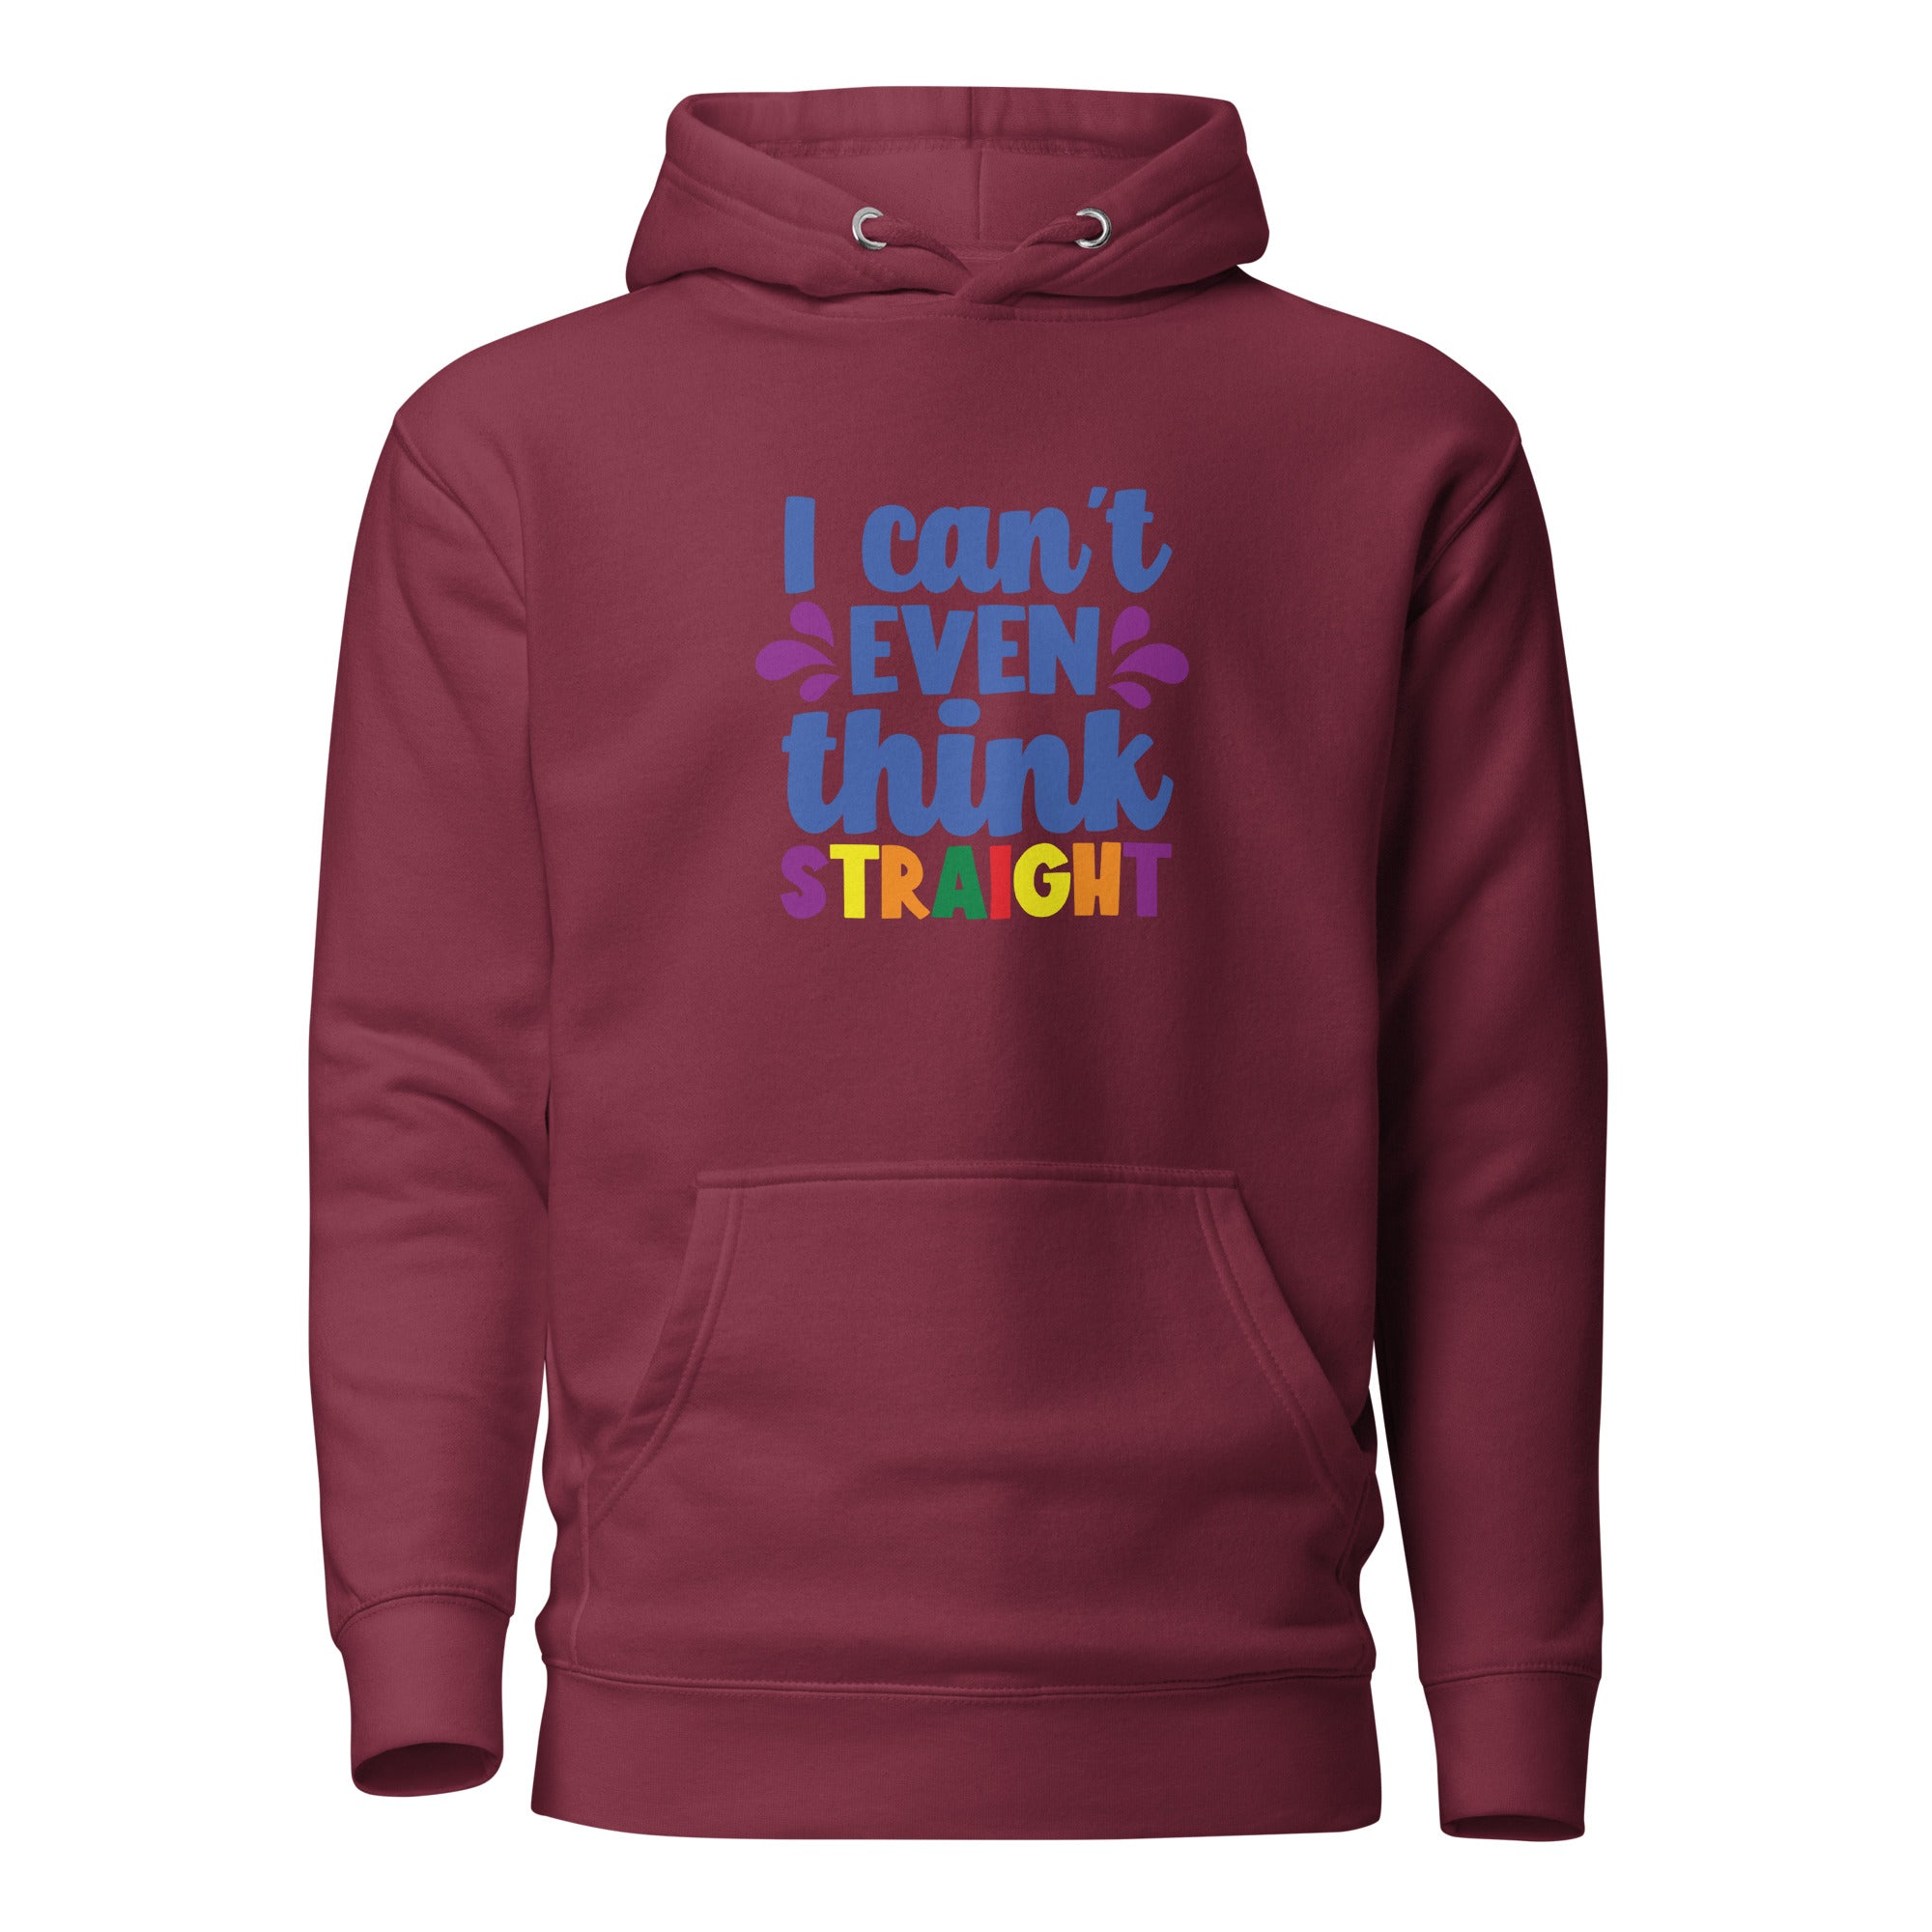 Unisex Hoodie- I can't even think straight